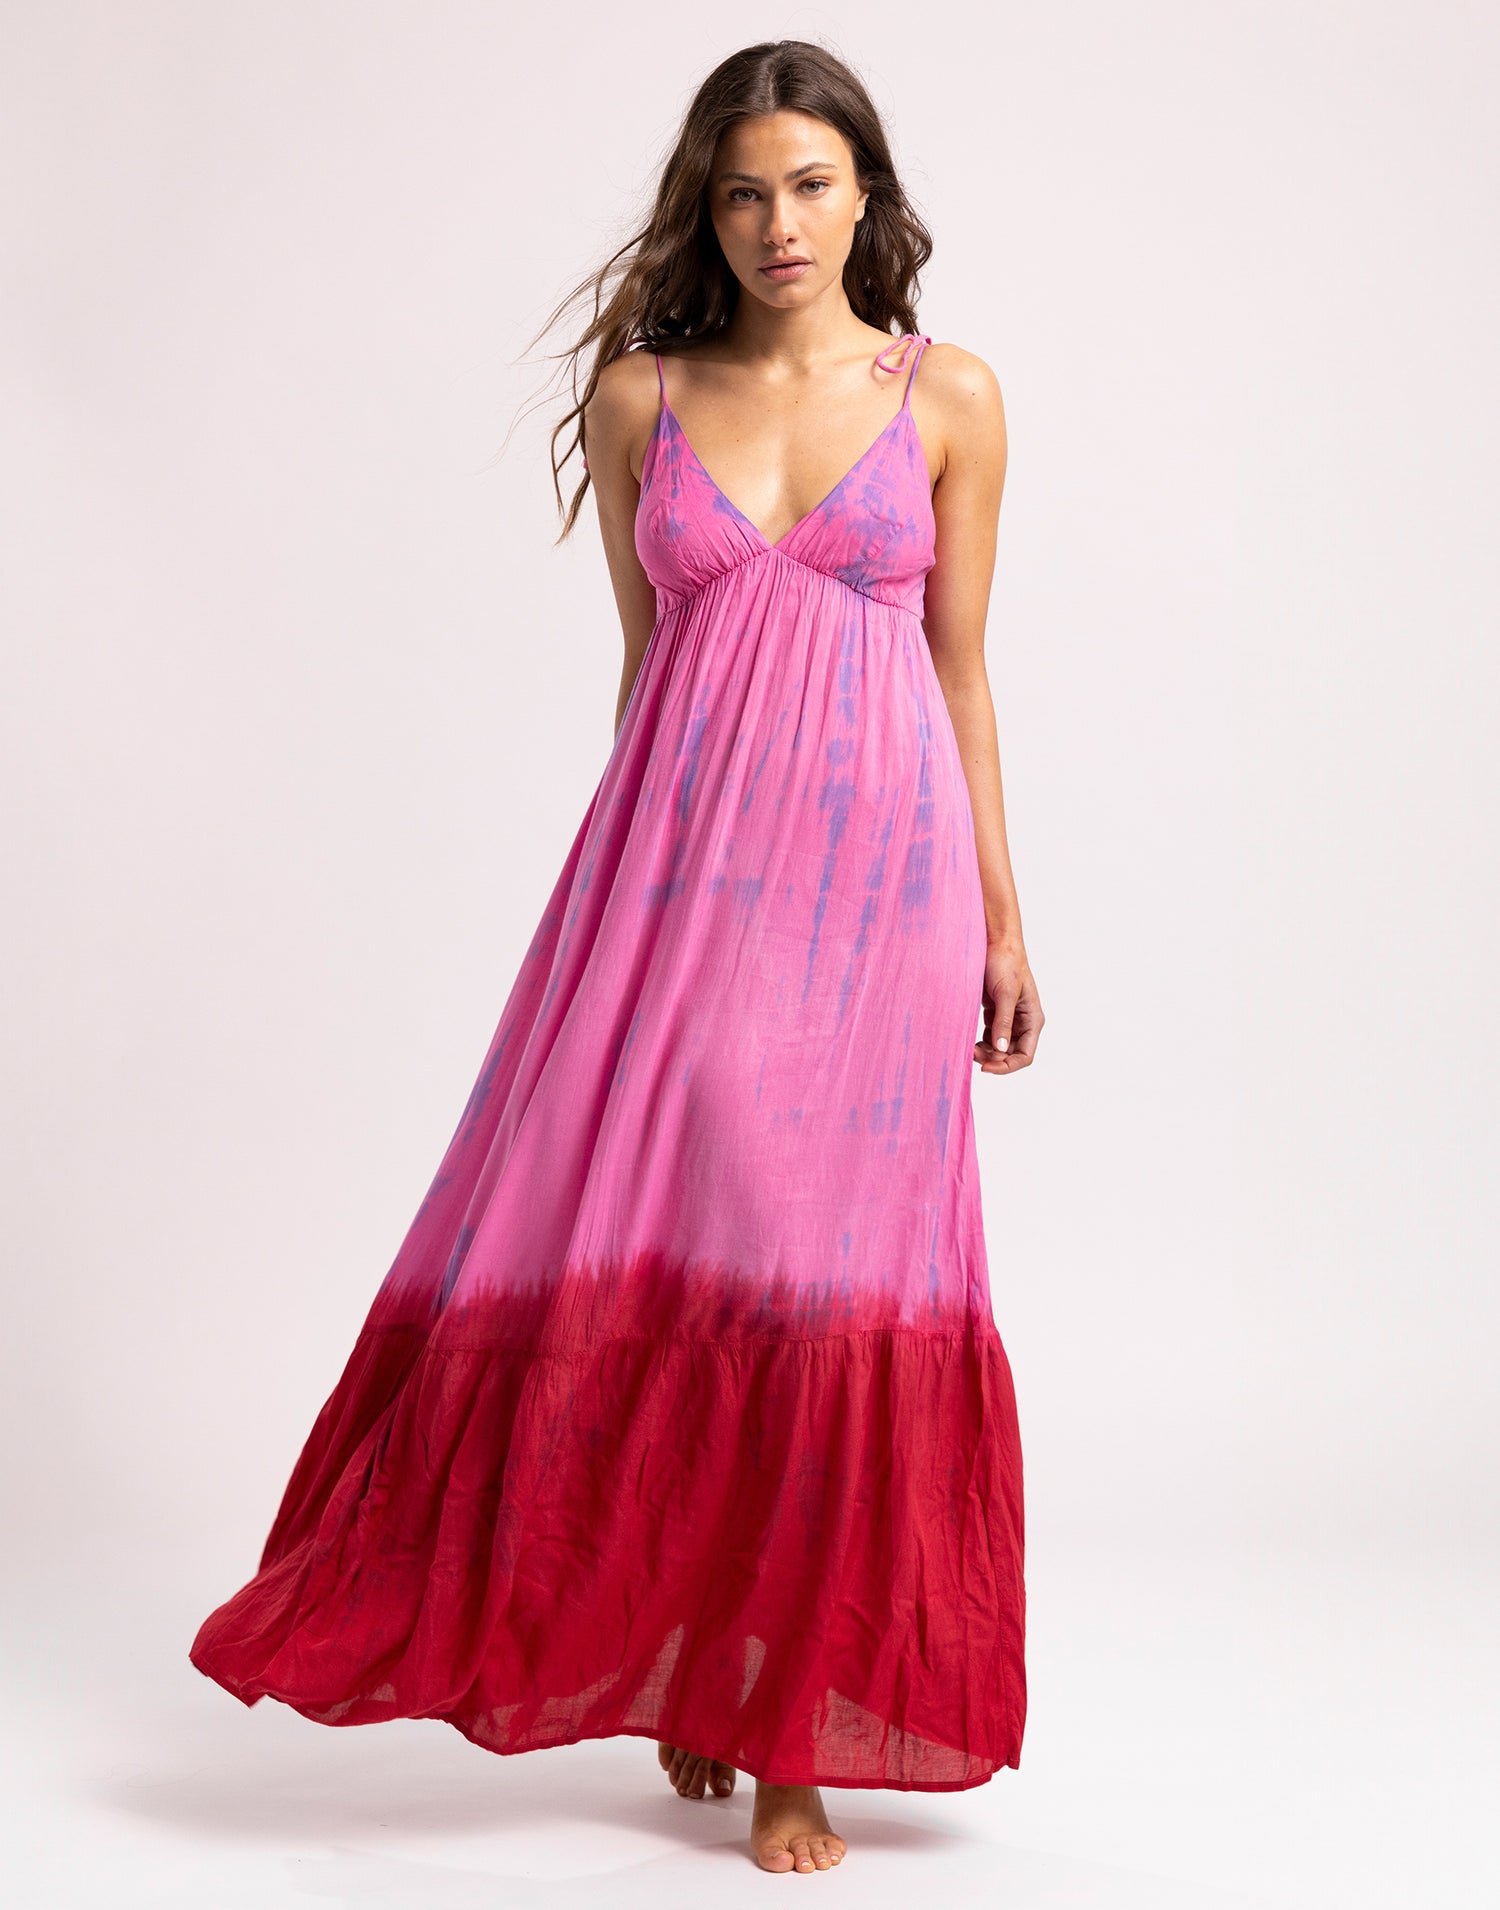 Dune Maxi Dress by Tiare Hawaii in Fuchsia Ombre - Front View